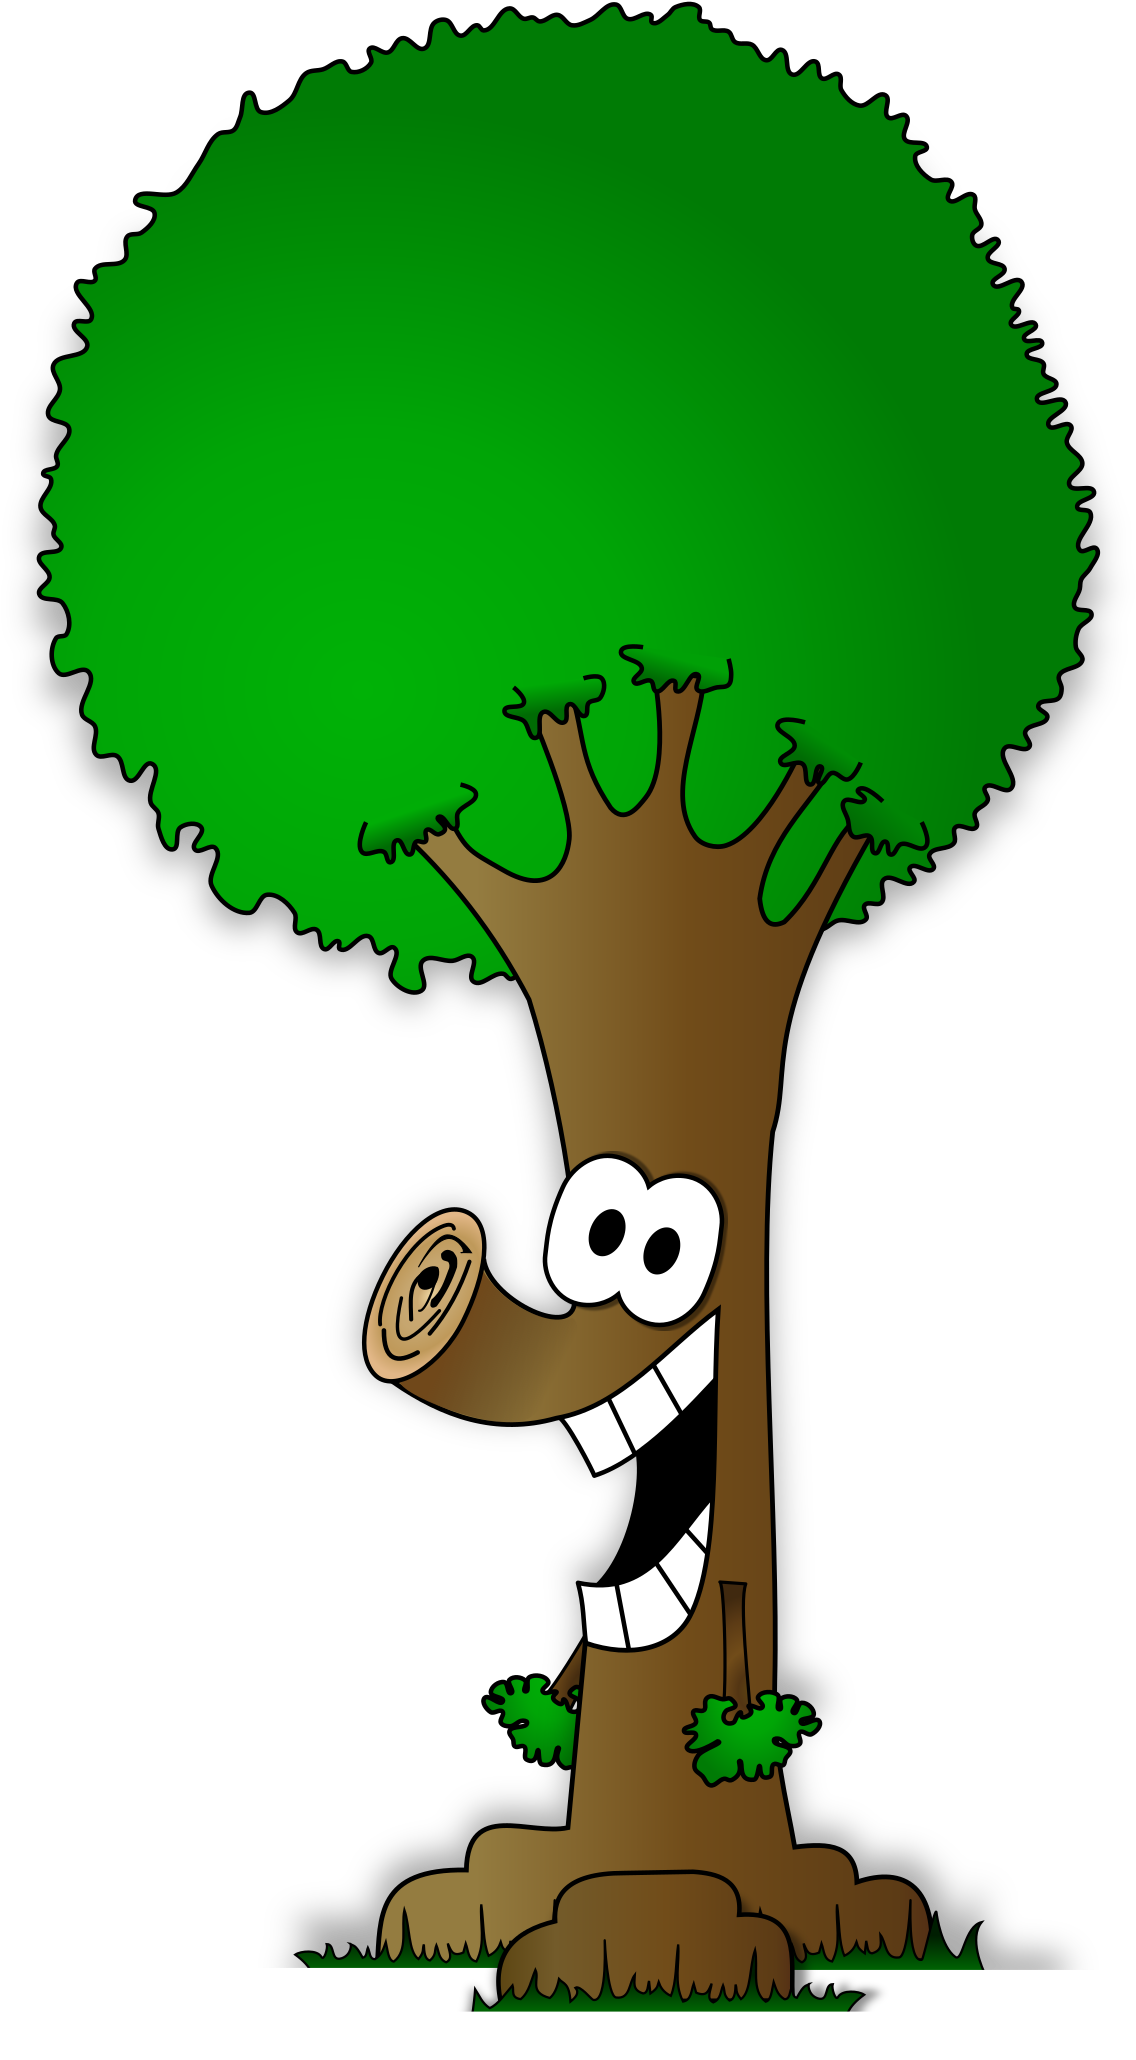 Find This Pin And More On What I Made With Inkscape - Personification Tree (1697x2400)